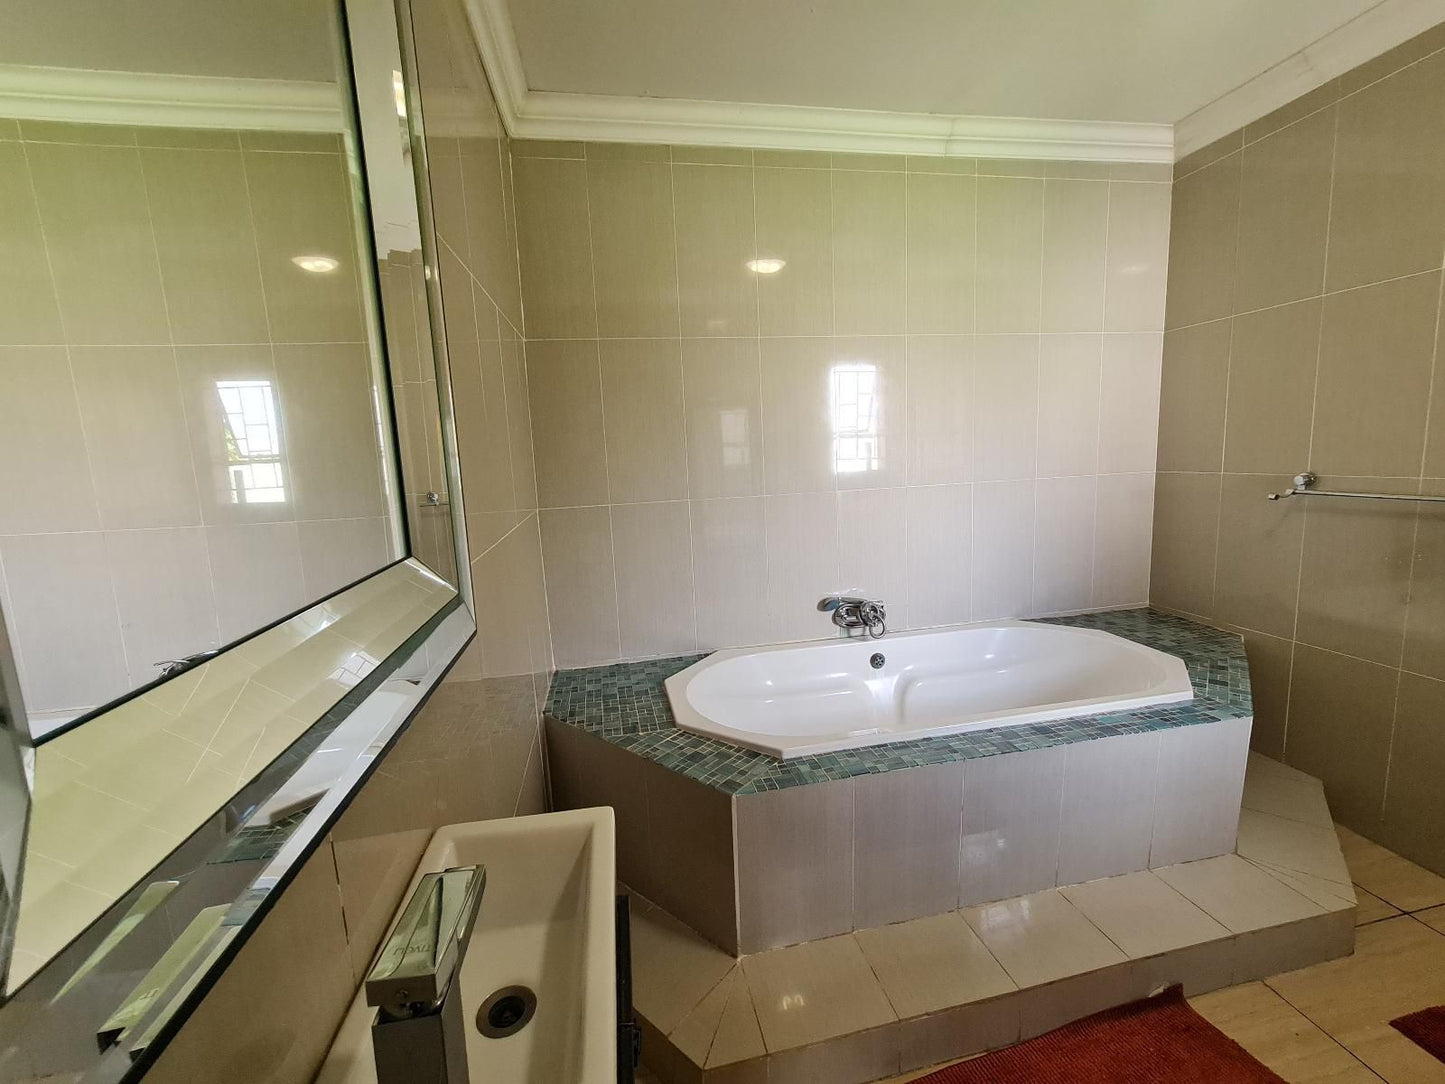 Quereba Bed And Breakfast Riviera Park Mahikeng North West Province South Africa Bathroom, Swimming Pool